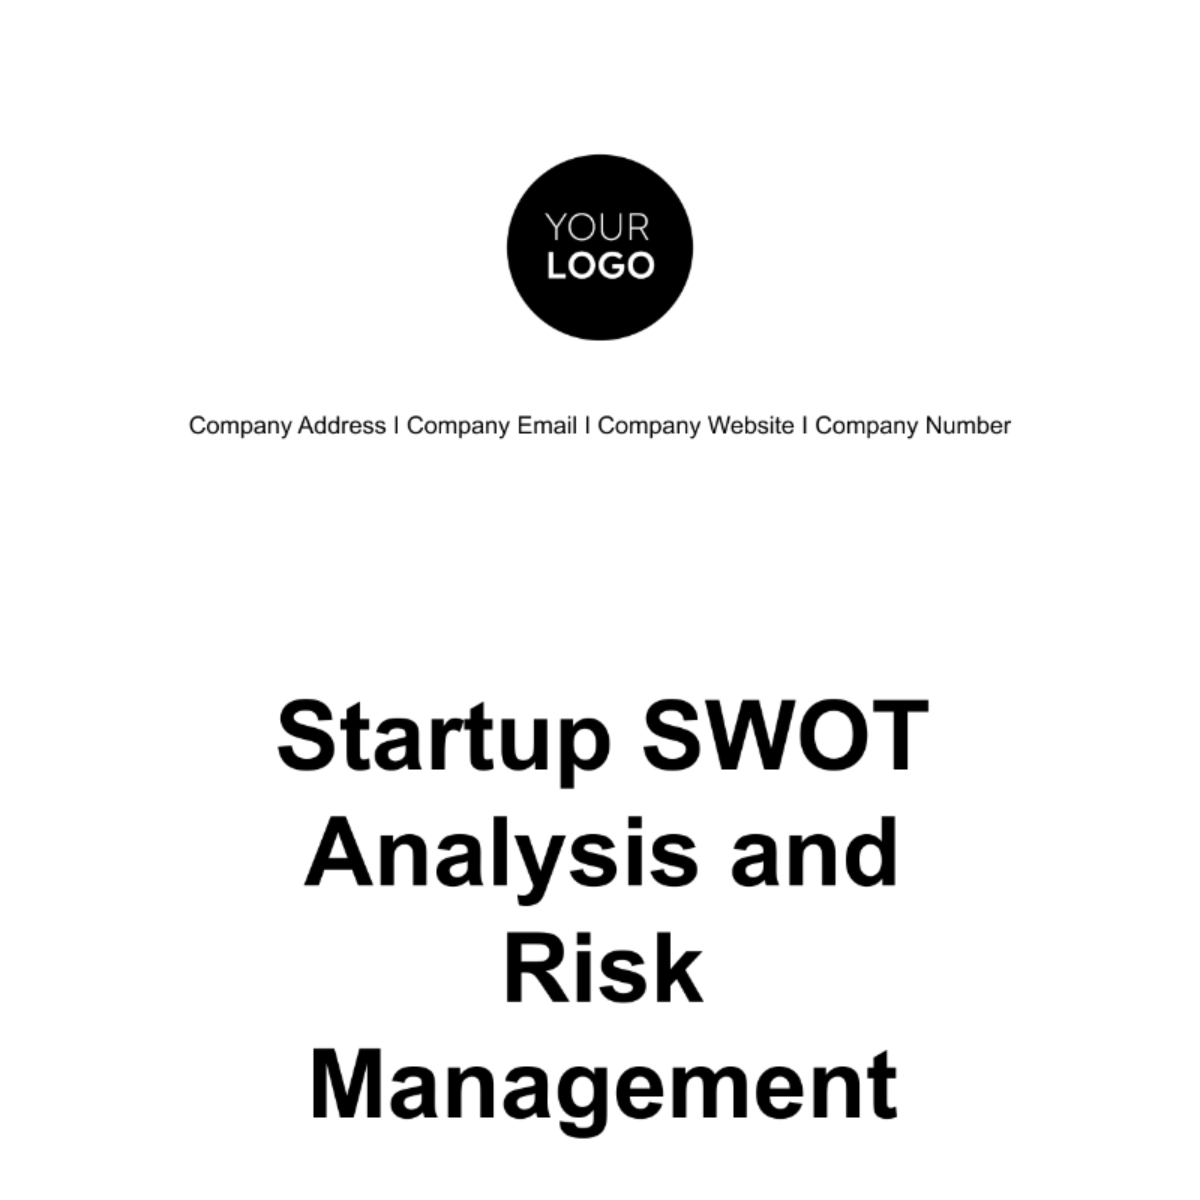 Startup SWOT Analysis and Risk Management Plan Template